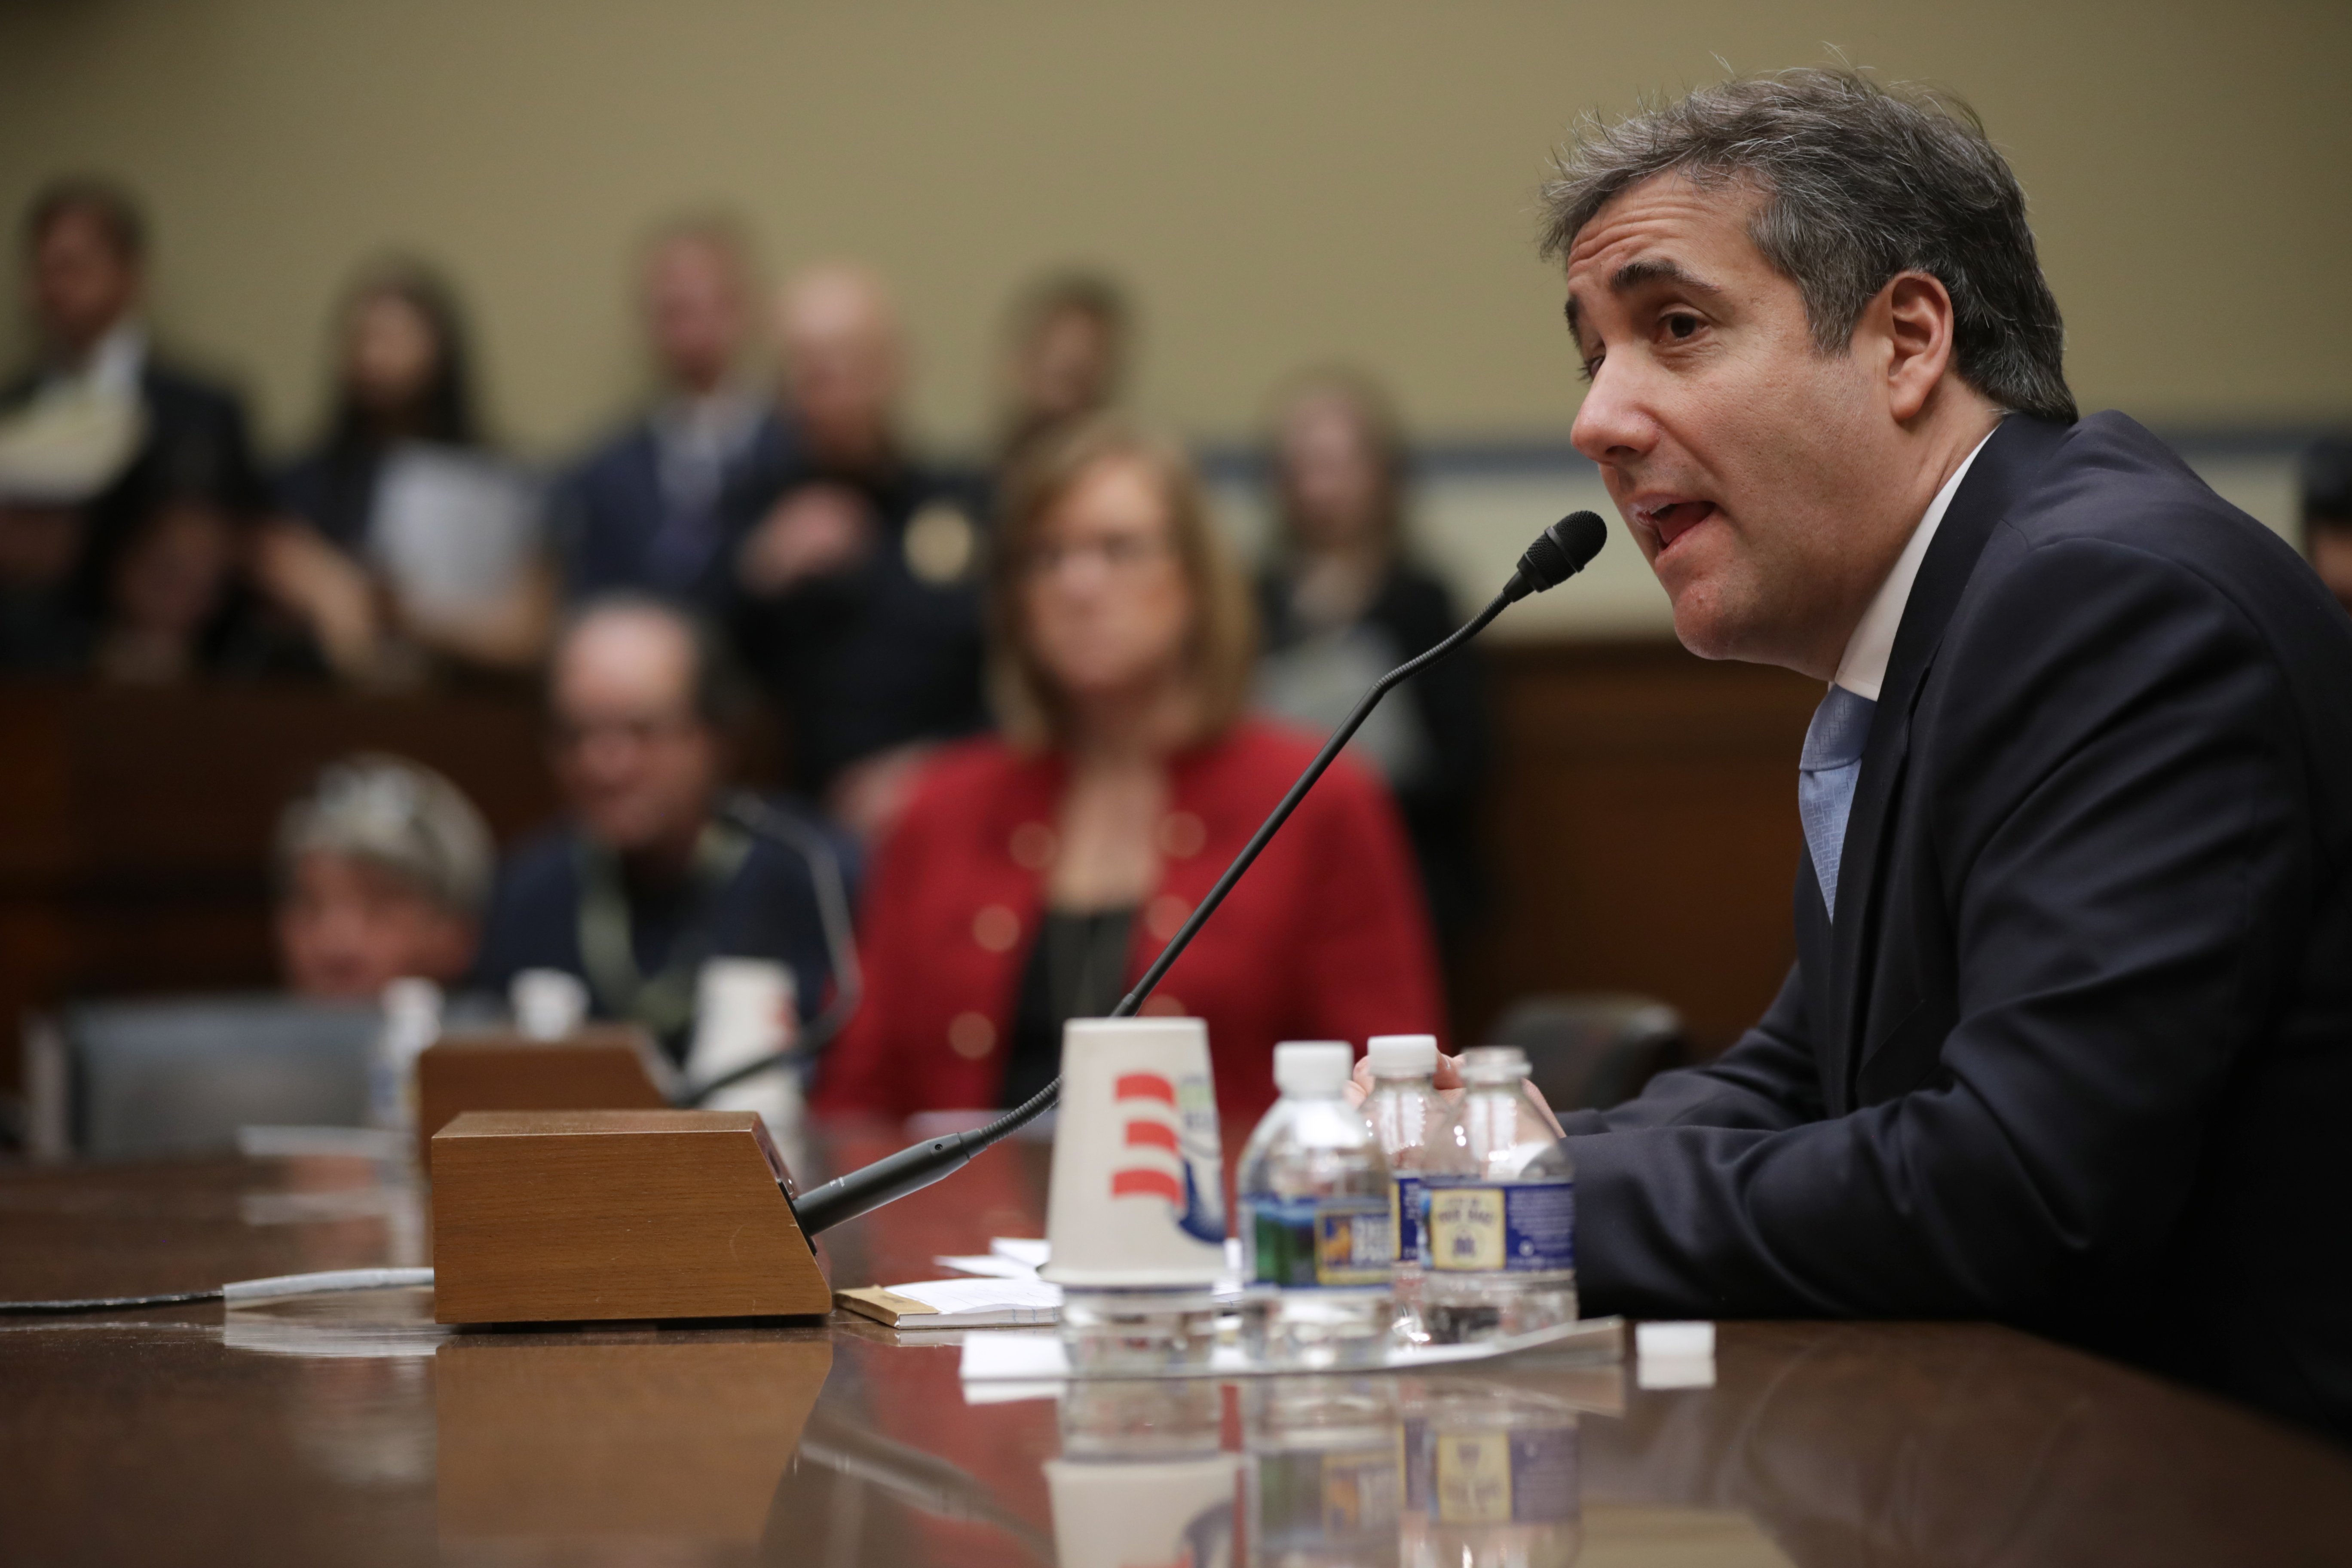 Former Trump lawyer Michael Cohen during his testimony before the House Oversight Committee on February 26, 2019.